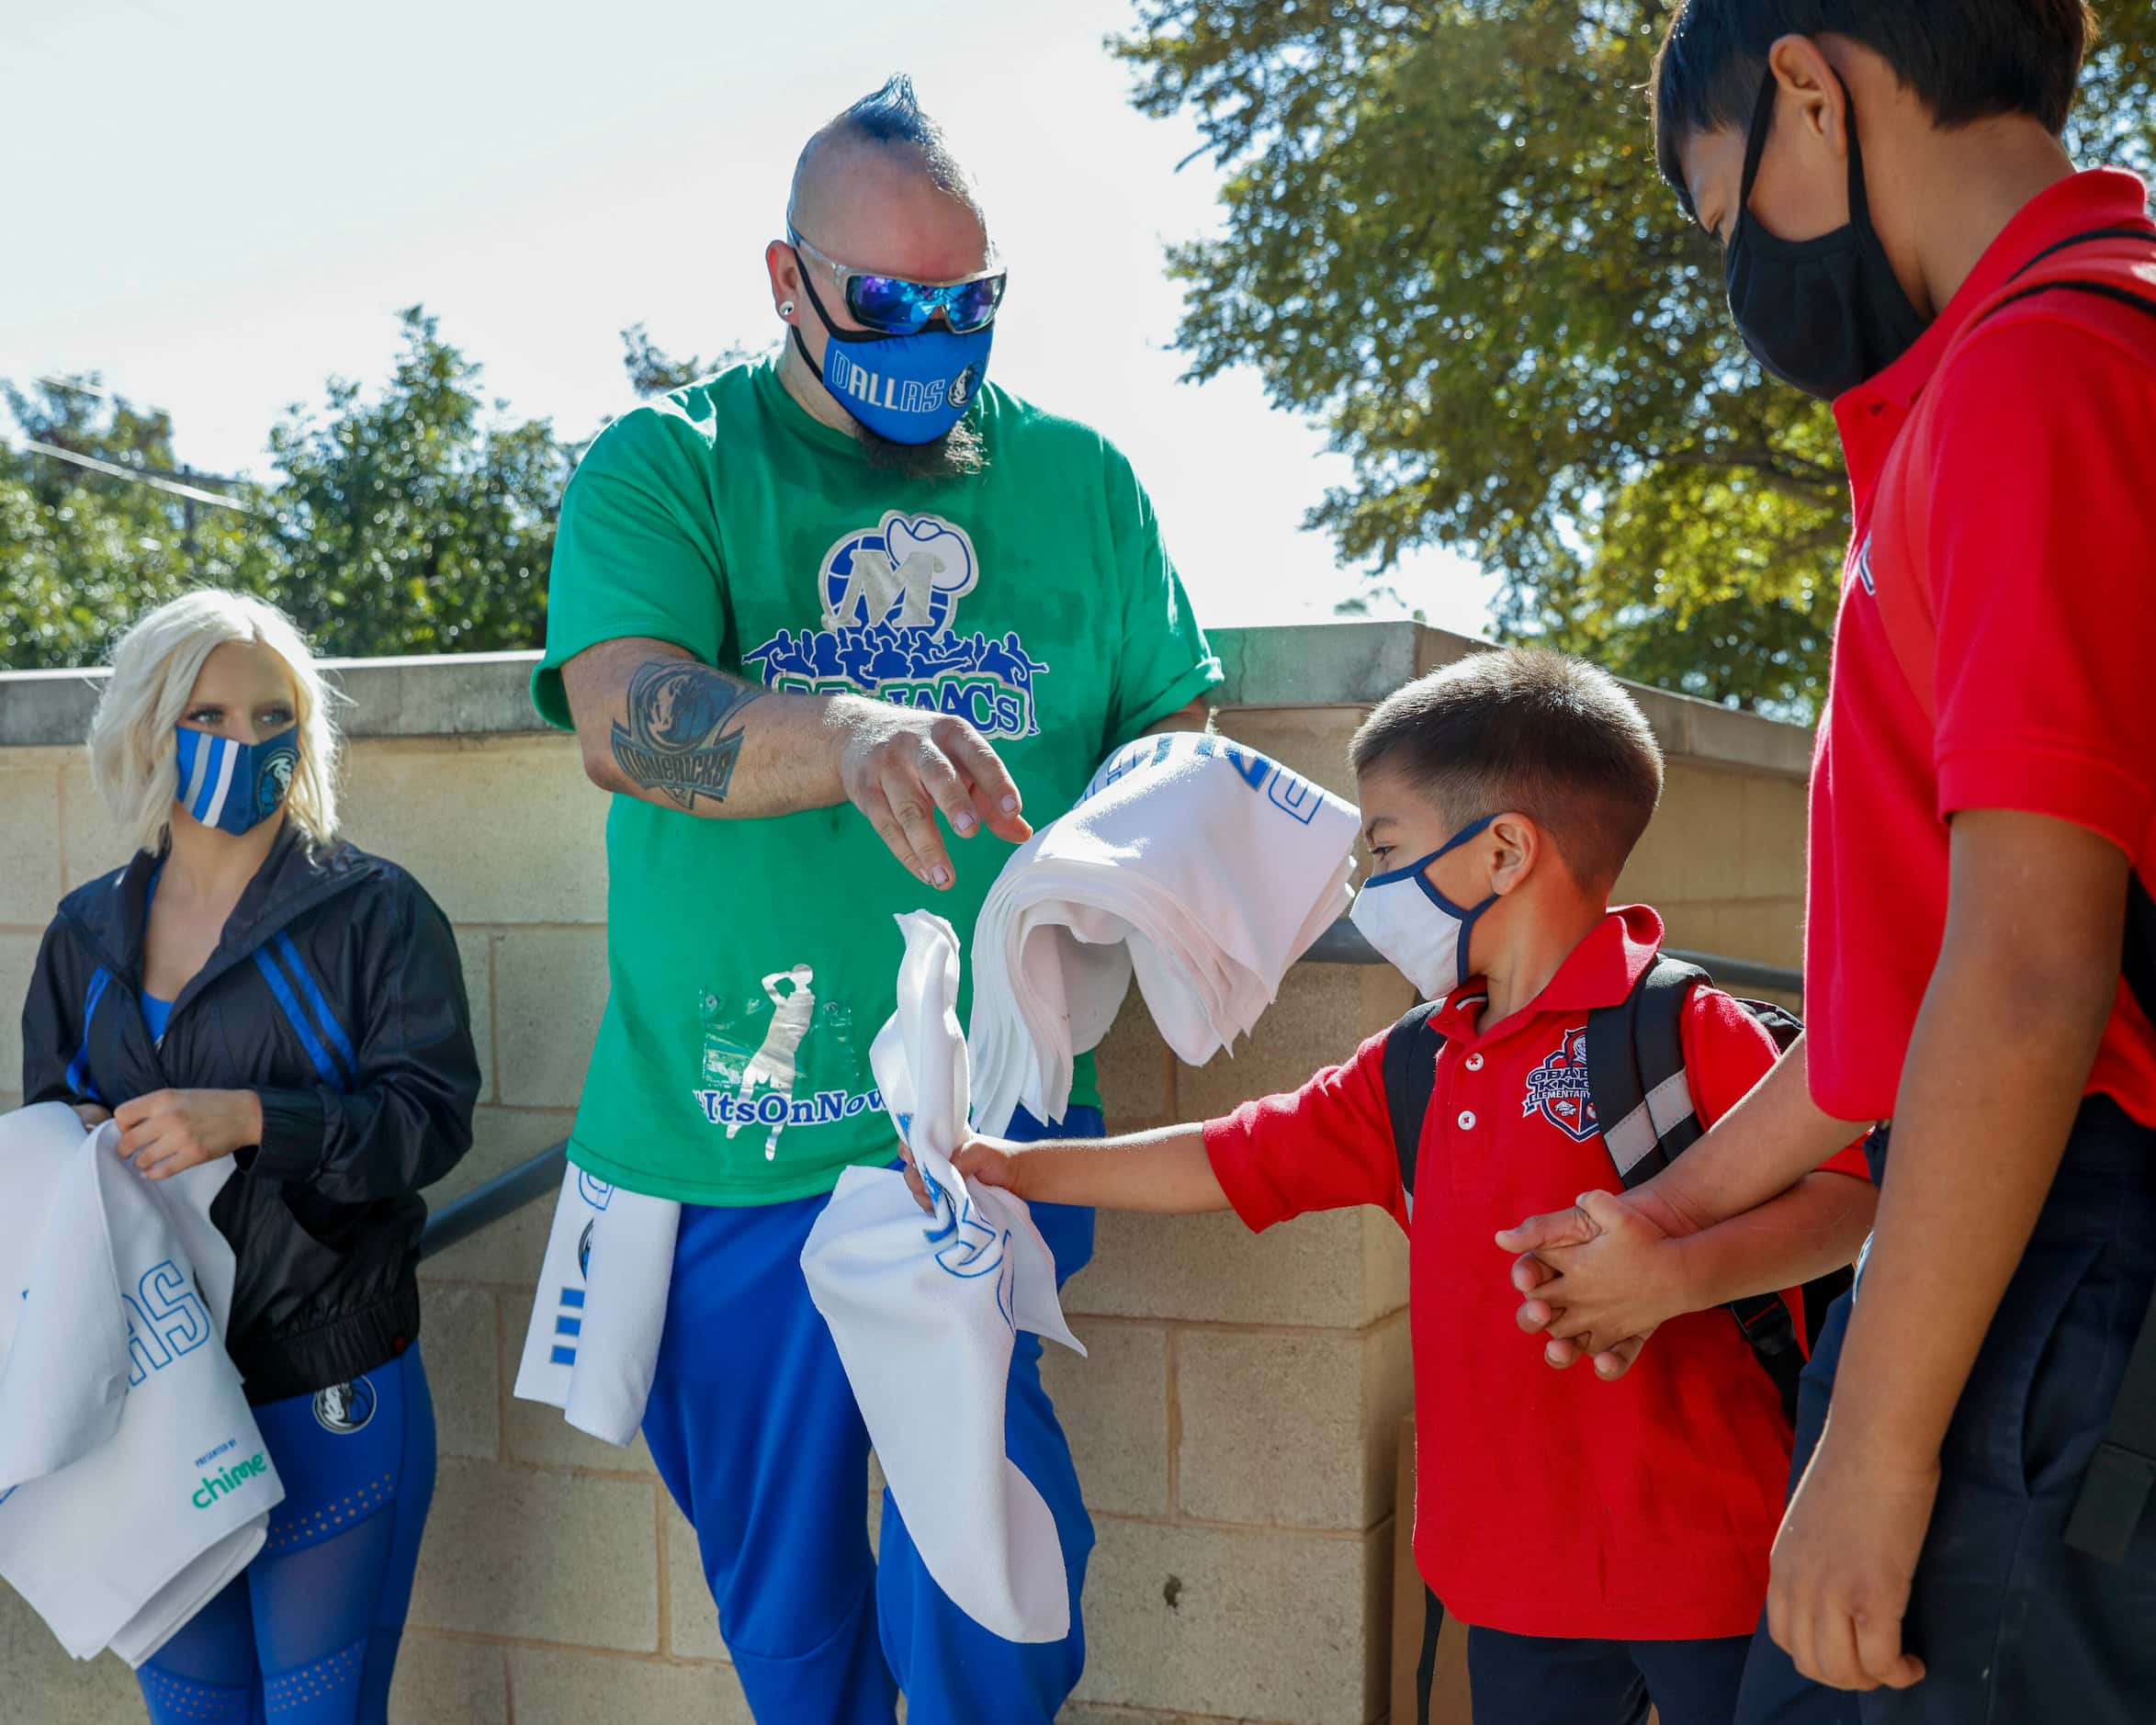 Mavs ManiAACs dancer Pro Zac gives a Dallas Mavericks towel to a student after the end of...